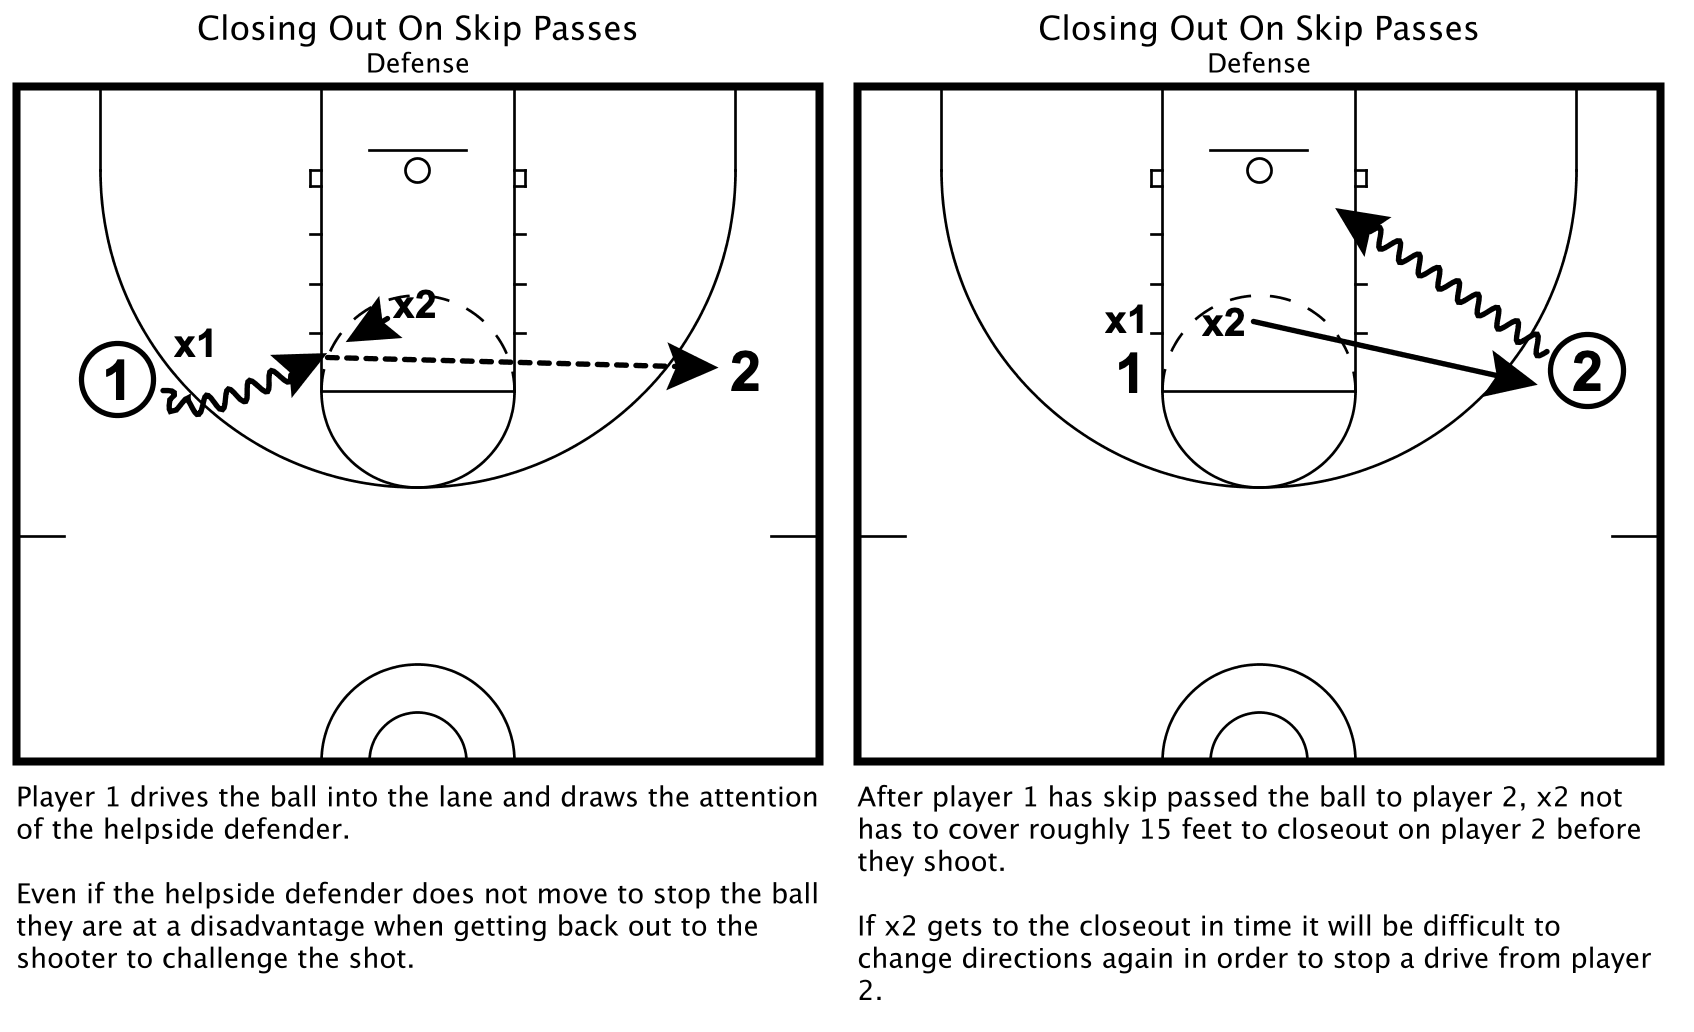 Closing Out On Skip Passes